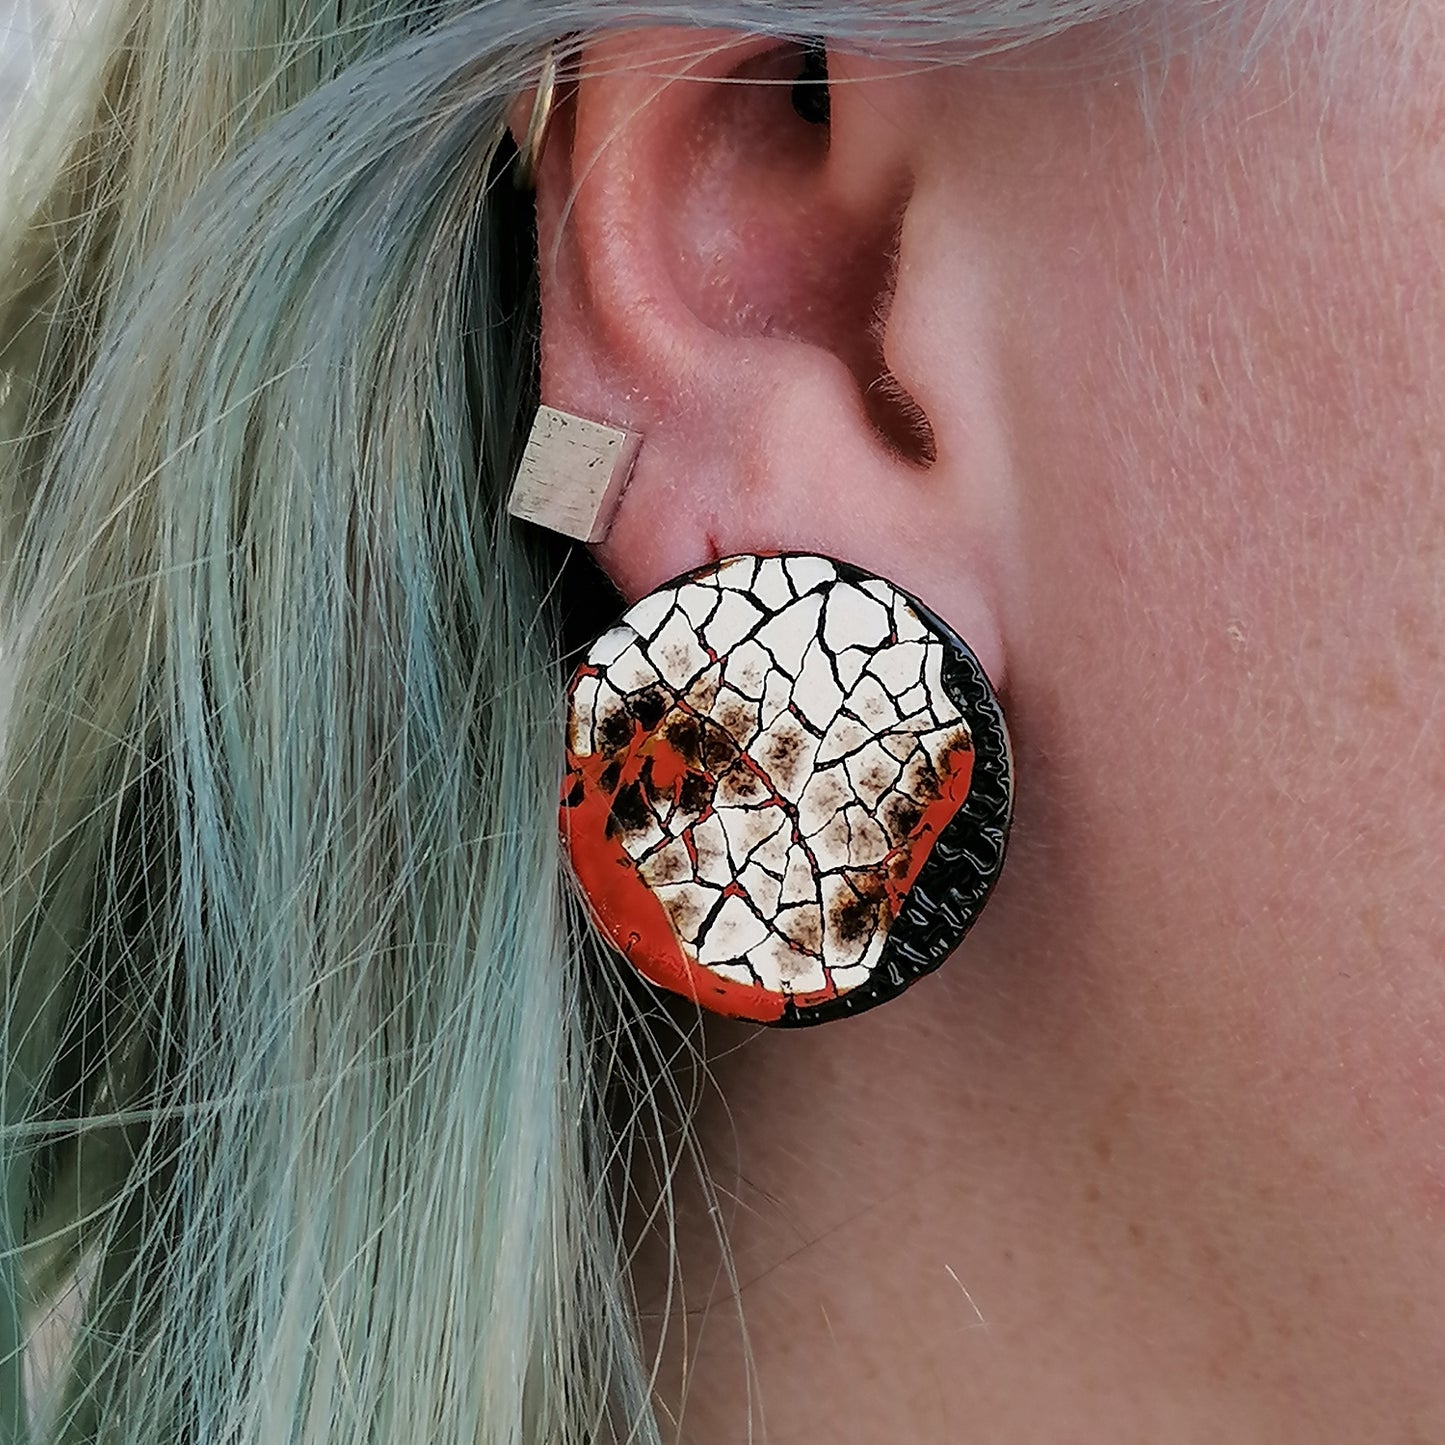 Images shows a single round stud earring being modeled by a blued haired model.. Modern mosaic earrings made out of real eggshell and black lacquer with an area of raised black wrinkled texture and patches of red.